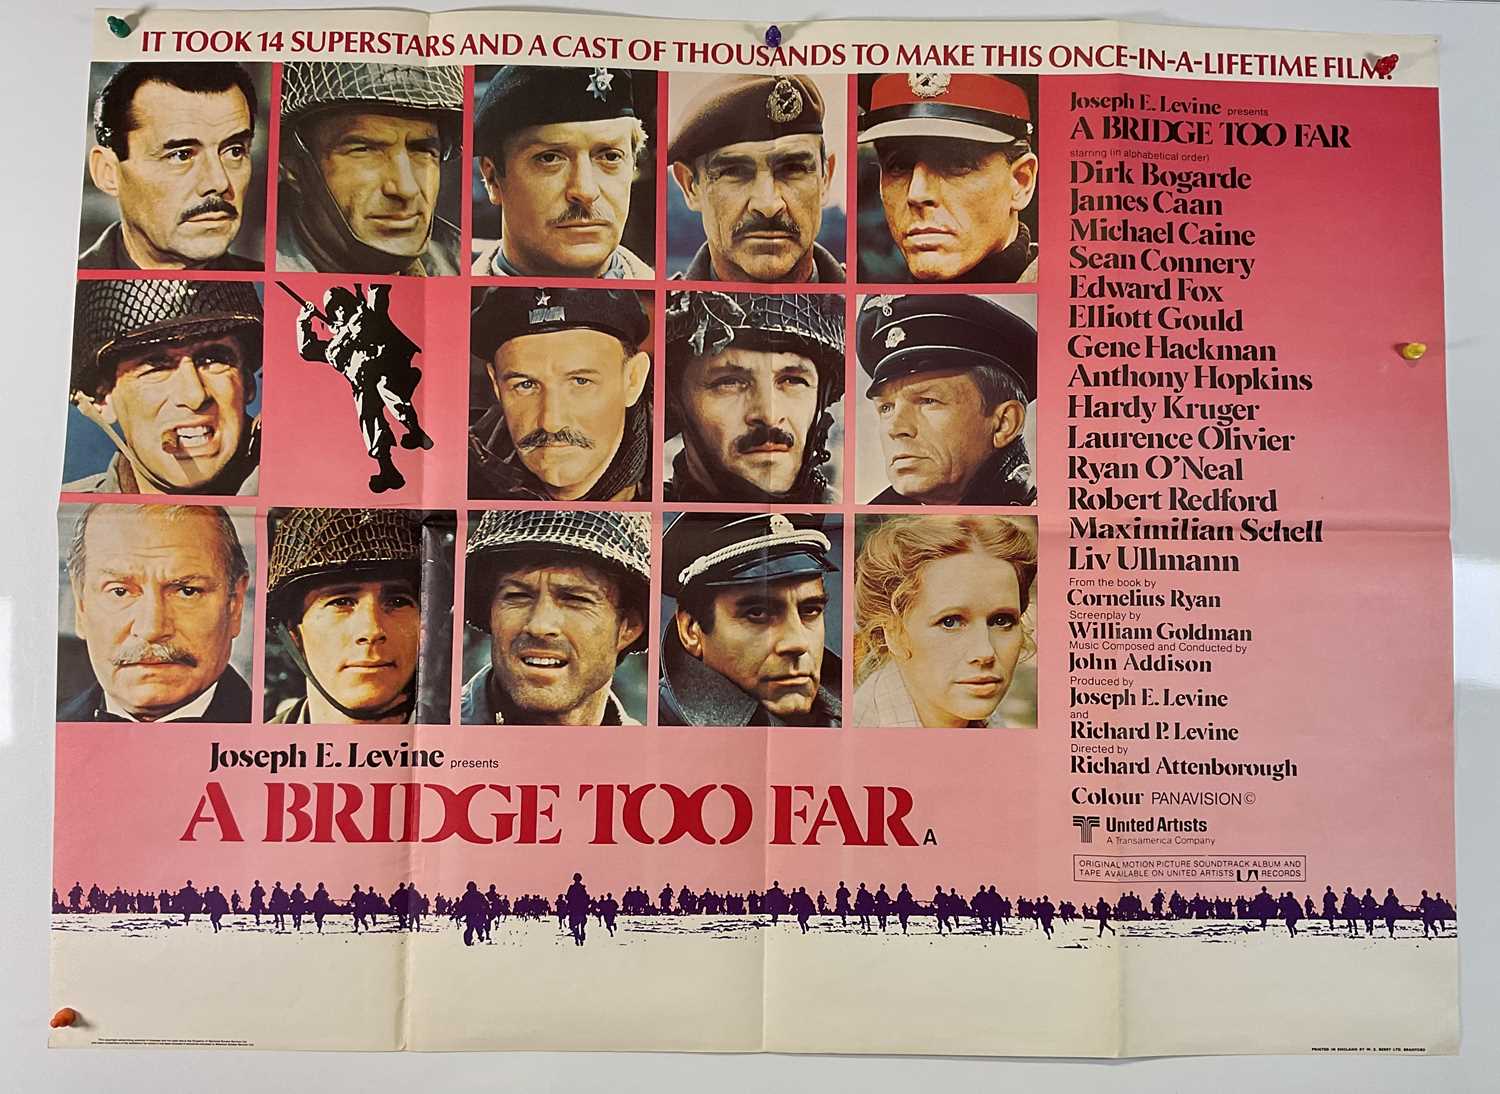 A BRIDGE TOO FAR (1977) UK Quad Style A and Style B film posters, for the classic war film - Image 2 of 3